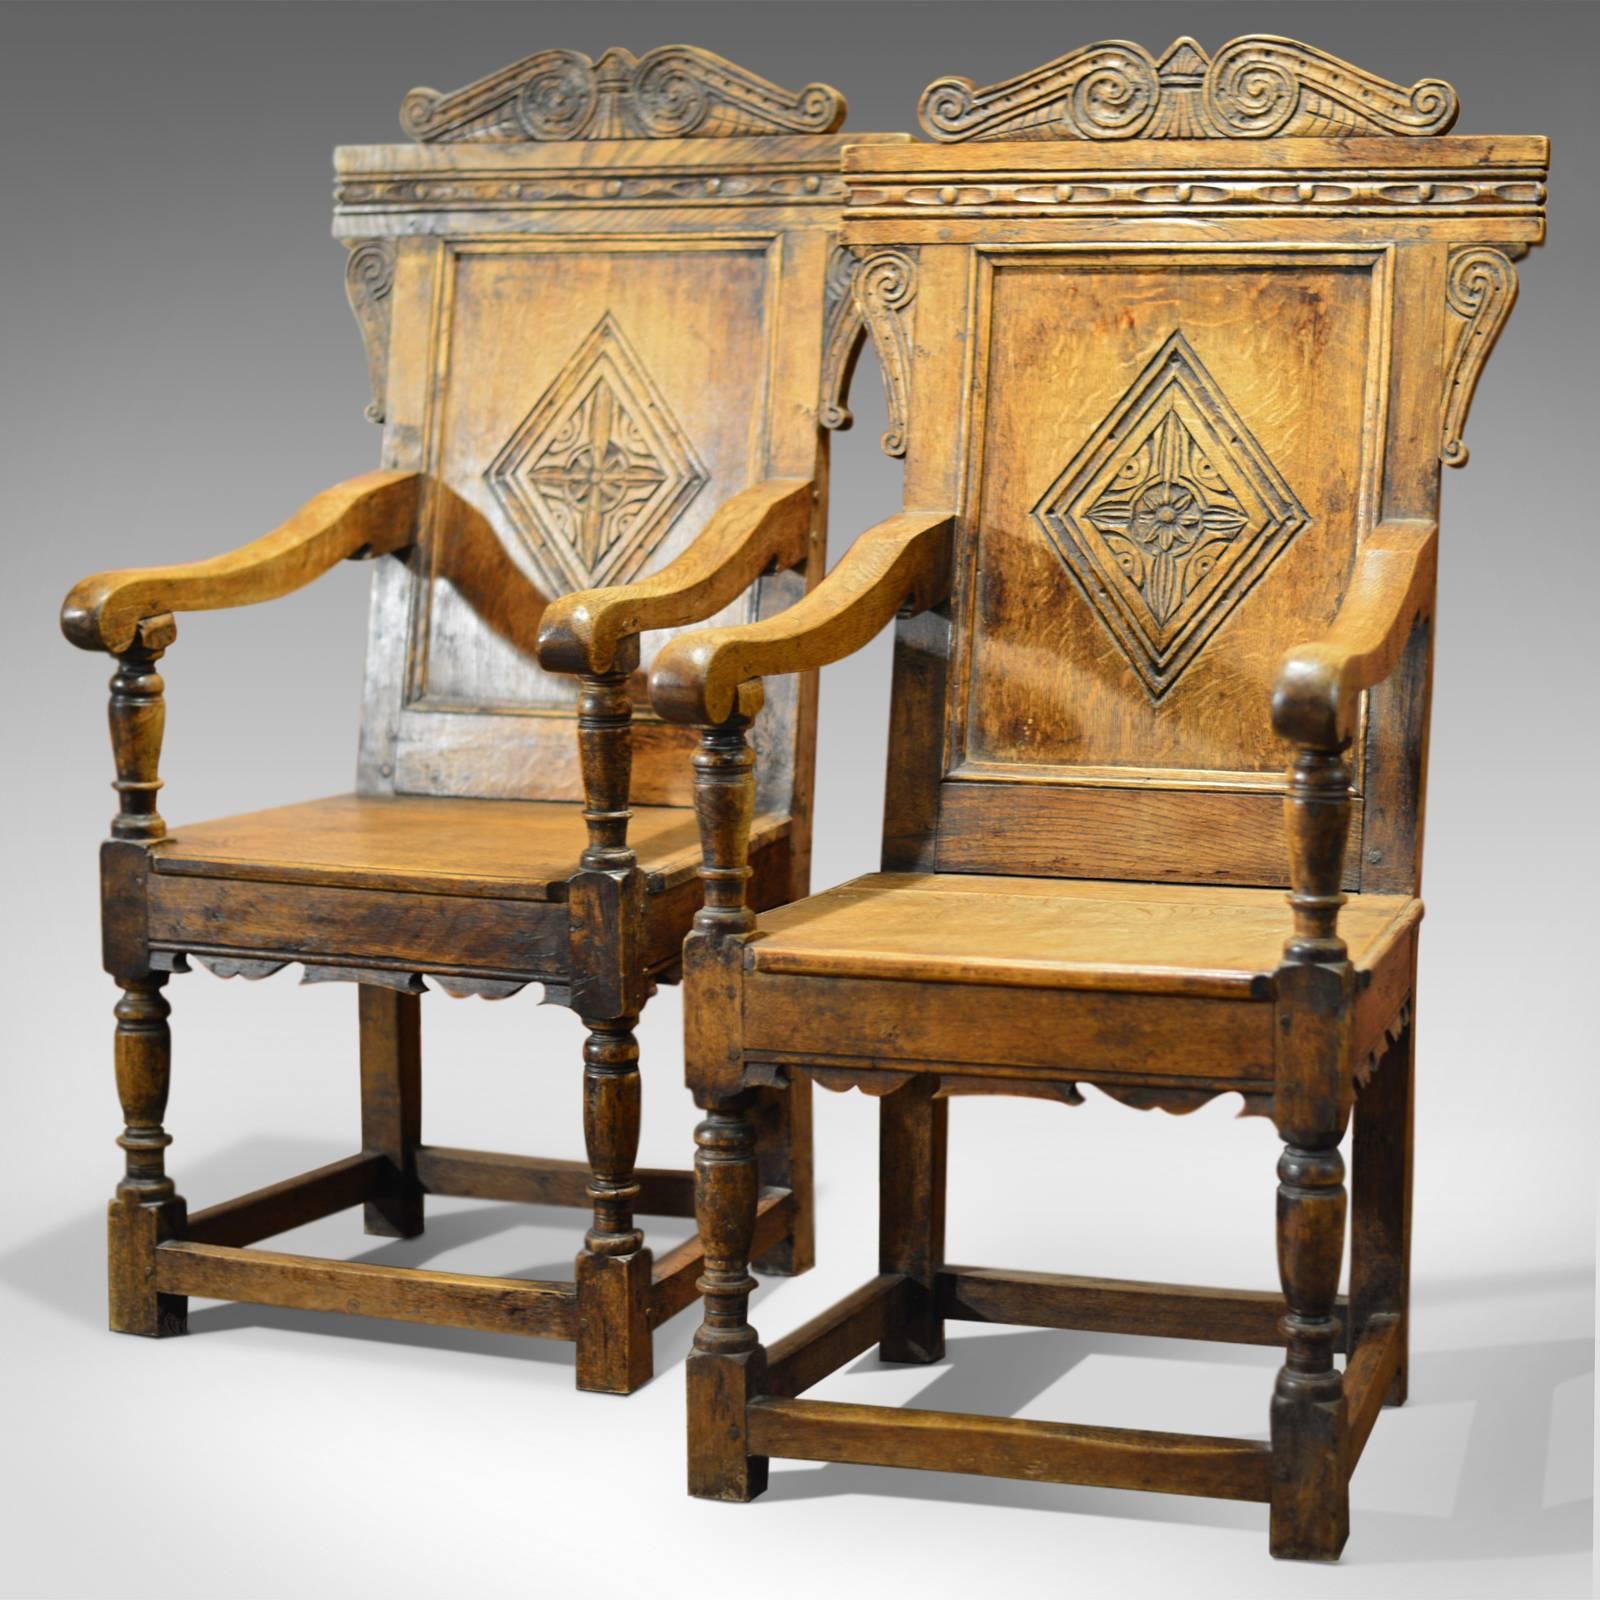 This is a 19th century, antique pair of baronial carver chairs.

This stunning pair of Victorian, 17th century revival armchairs are crafted in a wonderful honey colored English oak. The low level box stretcher unites the legs with generous stock